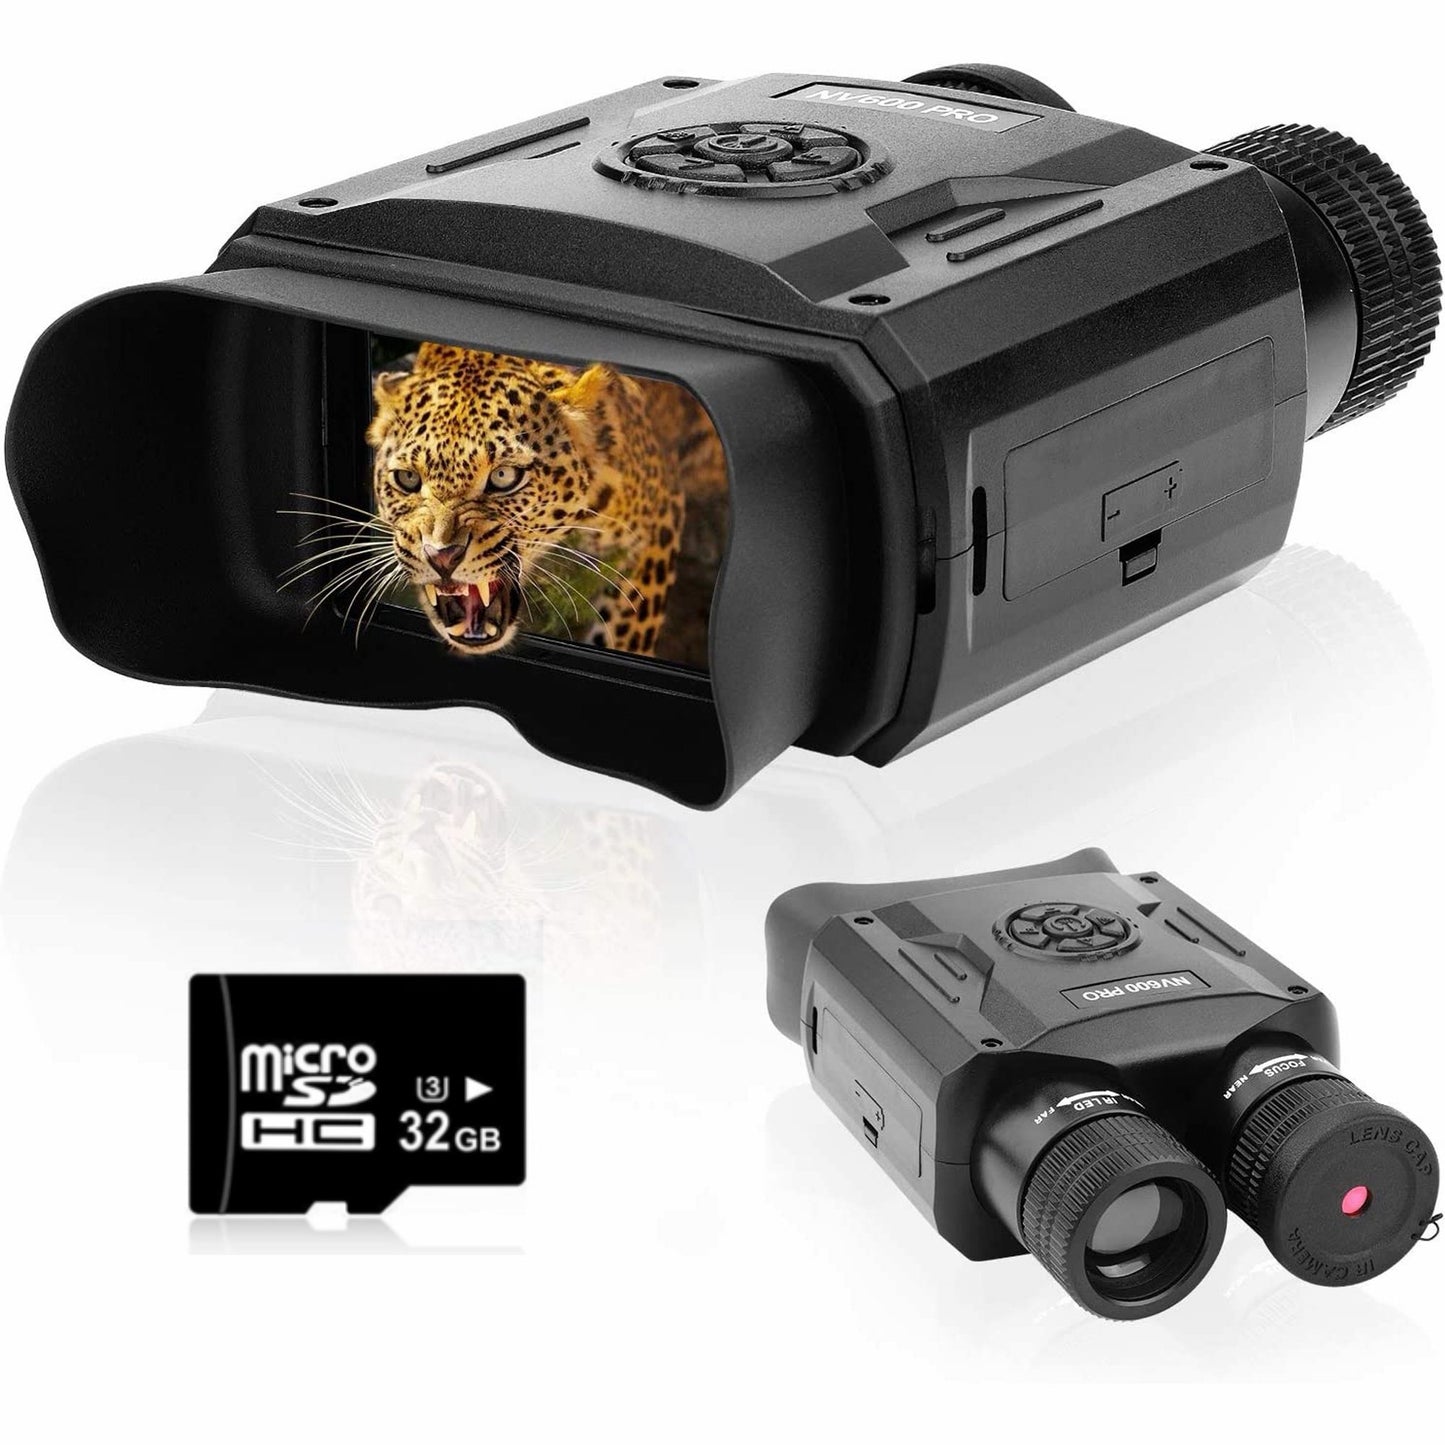 Night Vision Goggles -5X Night Vision Binoculars for Adults，3,5'' Large Screen Infrared Binocular Can Save Photo and Video with 32GB Memory Card